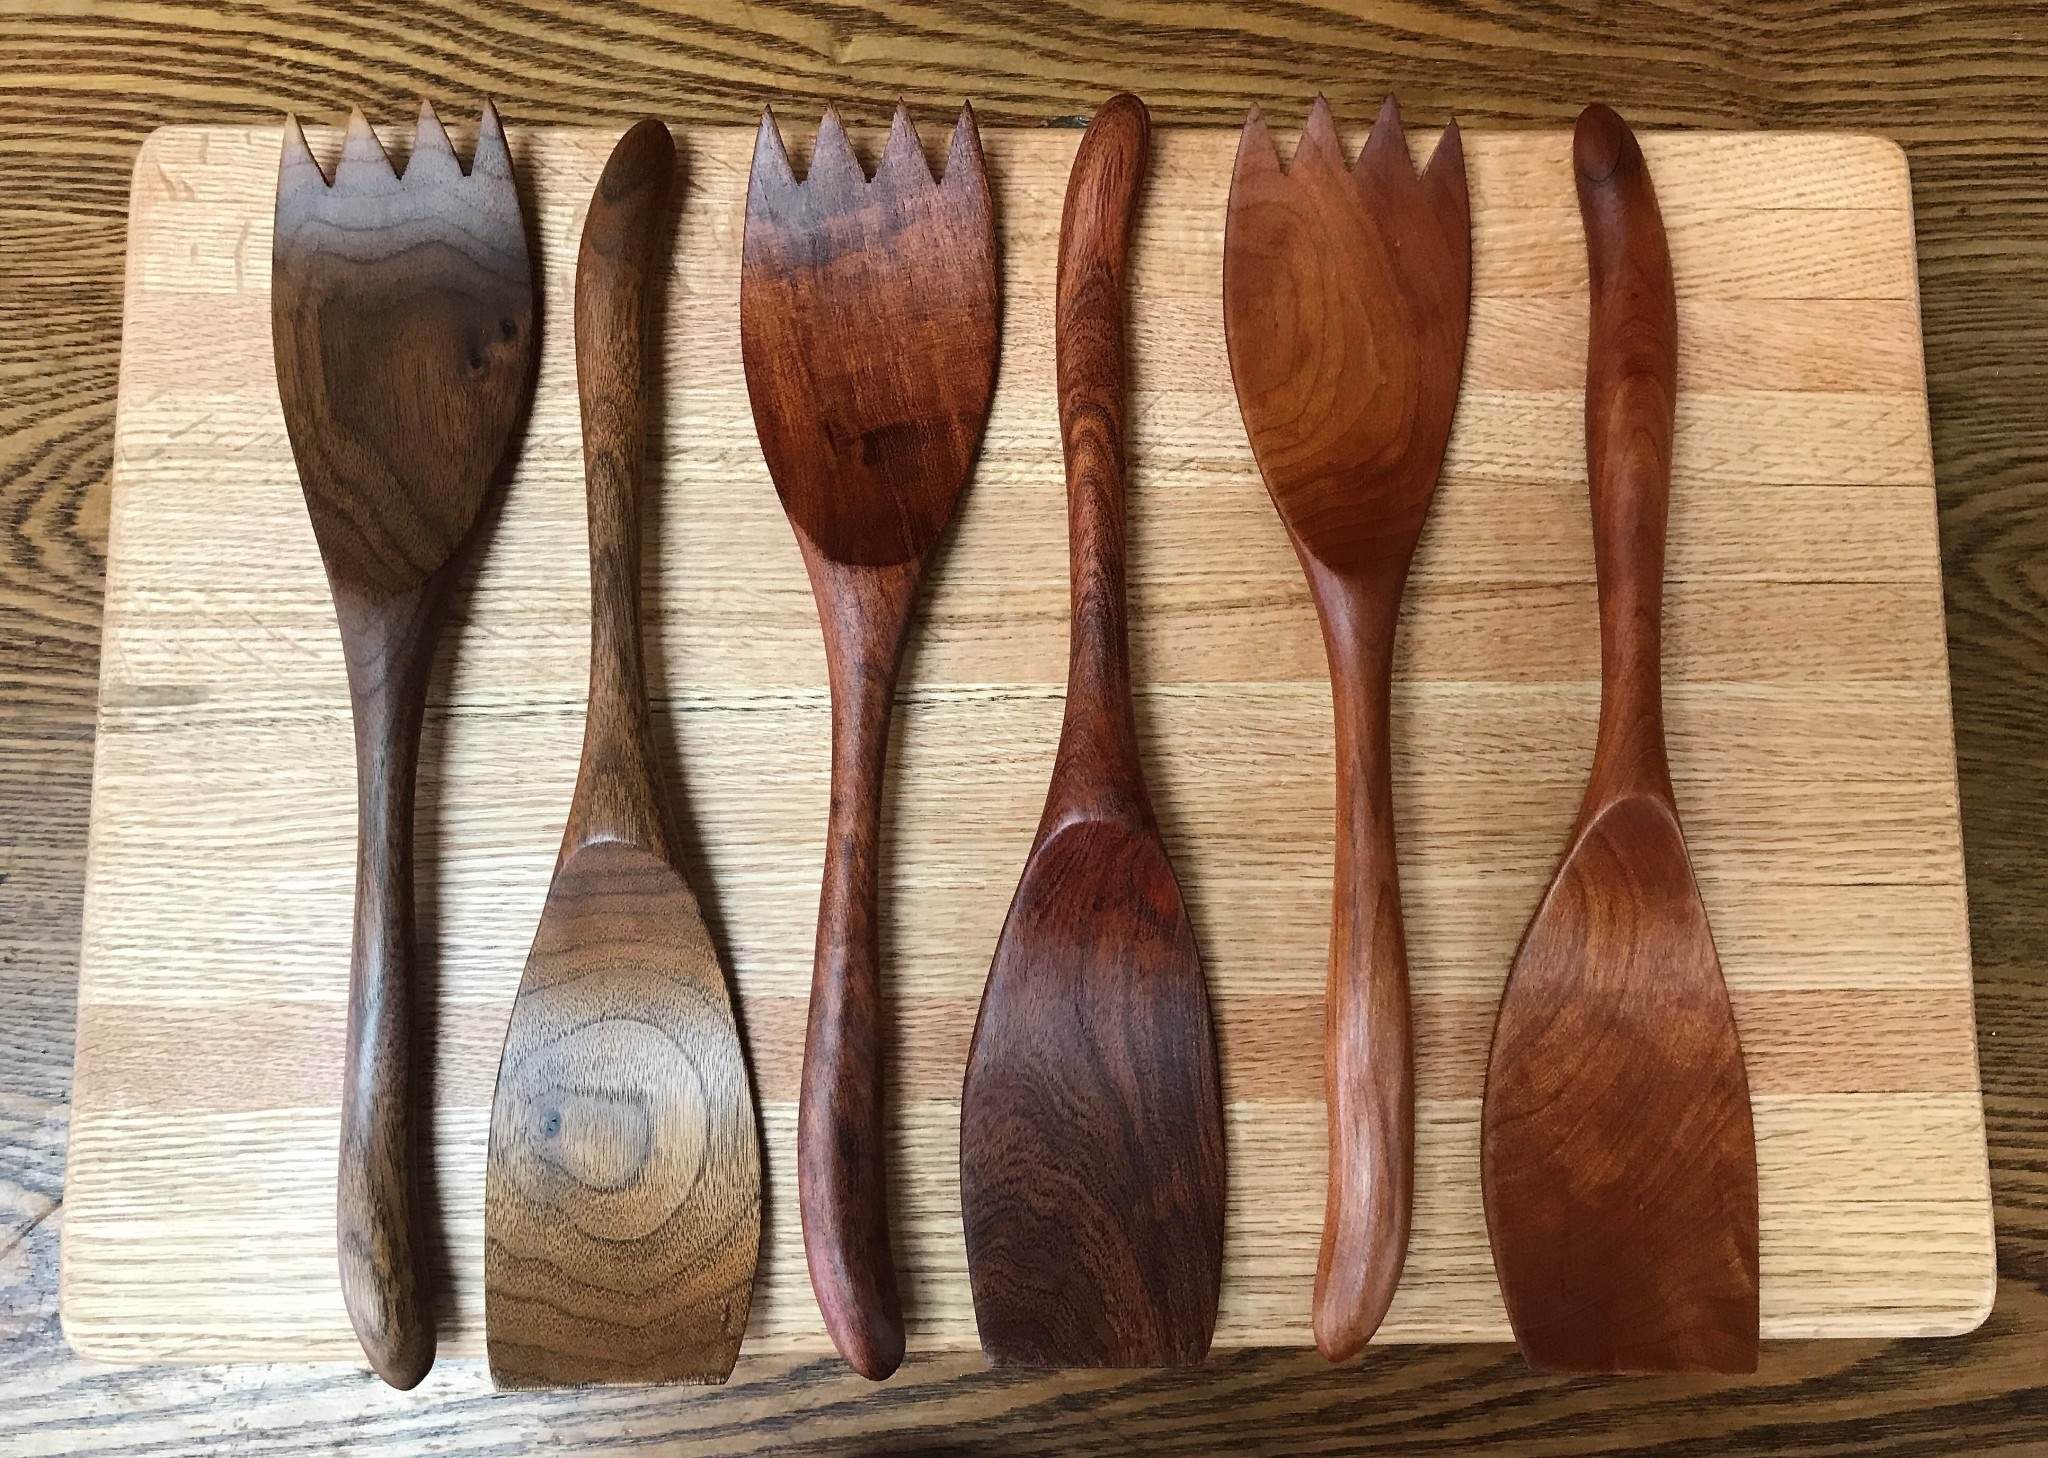 Narrow Salad Tossers - Cutting Boards and More